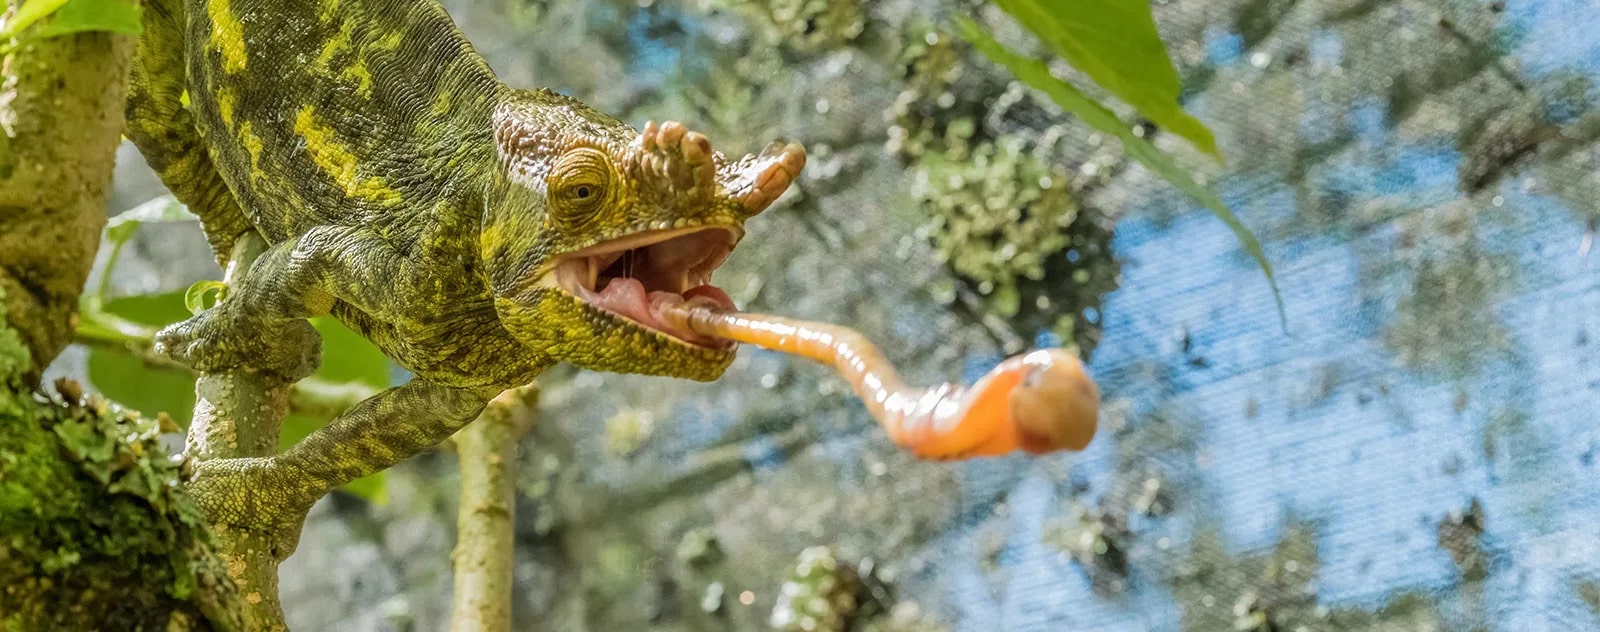 Close-up of Madagascar chameleon with its tongue extended.